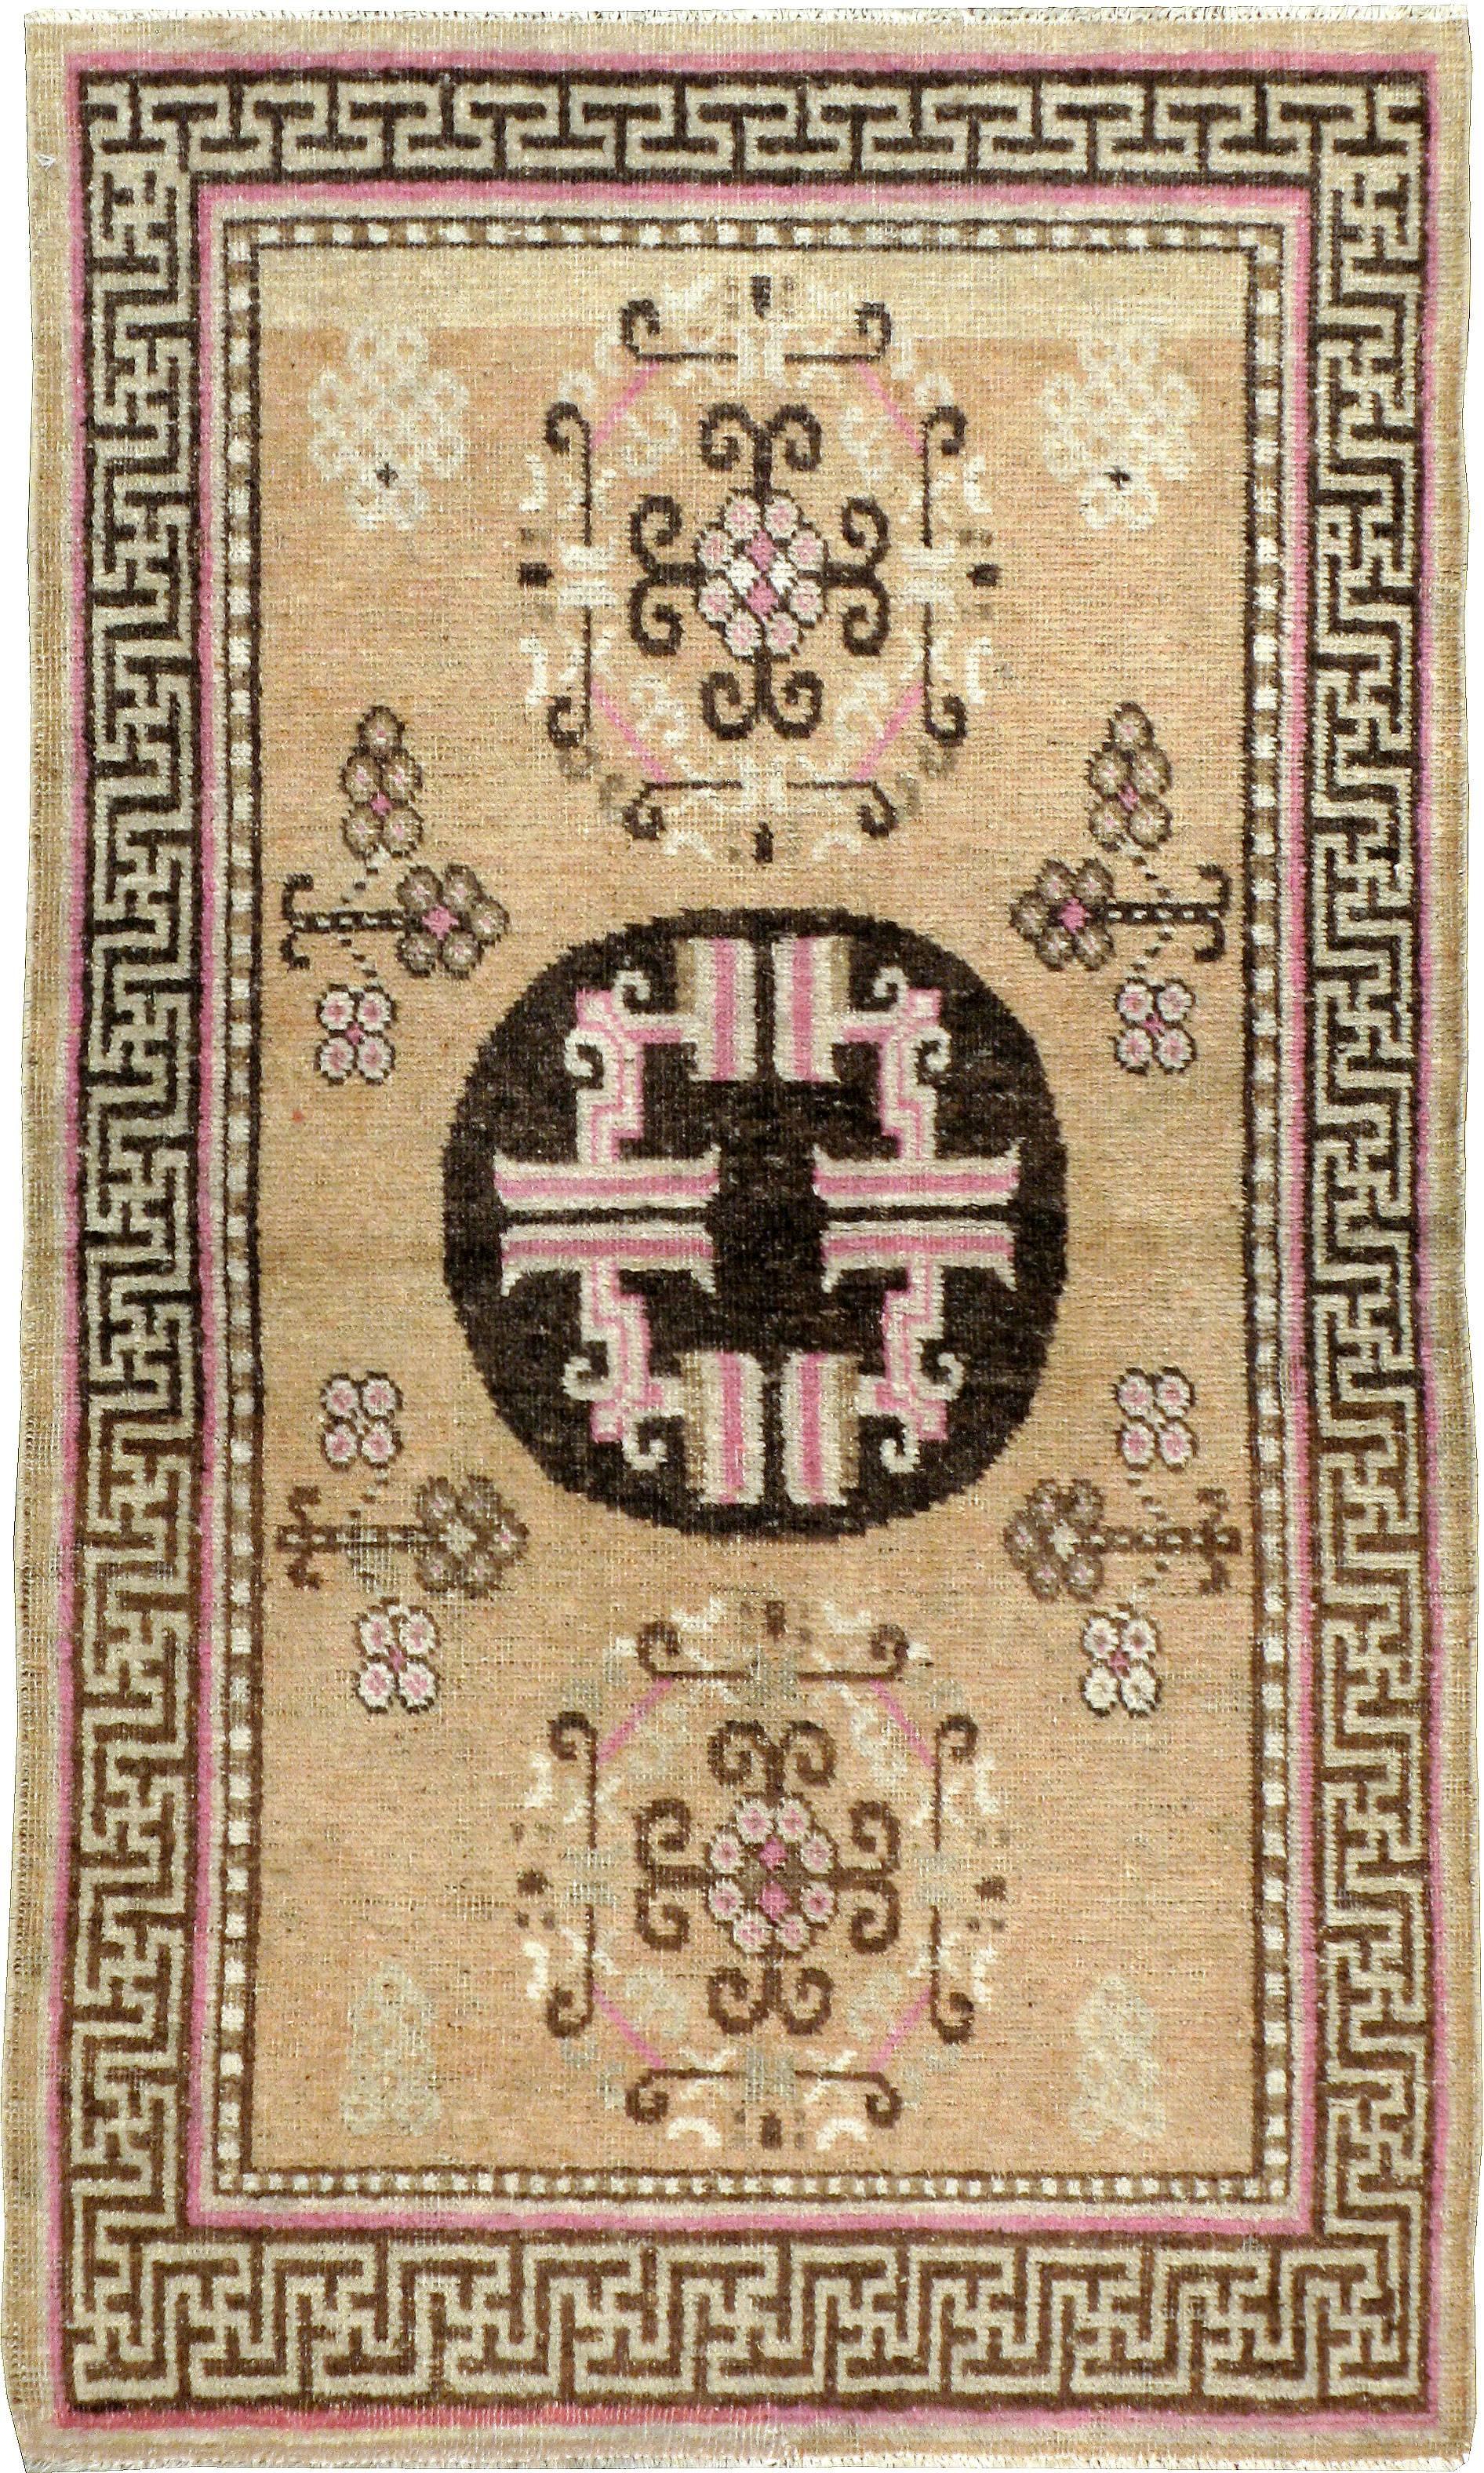 An early, 20th century East Turkestan Khotan carpet with a field made up of three primeval cloud sign medallions and four pomegranate plants. It is surrounded by a T-element Meander border with the ancient symbol of peace in Buddhist, Hindu and